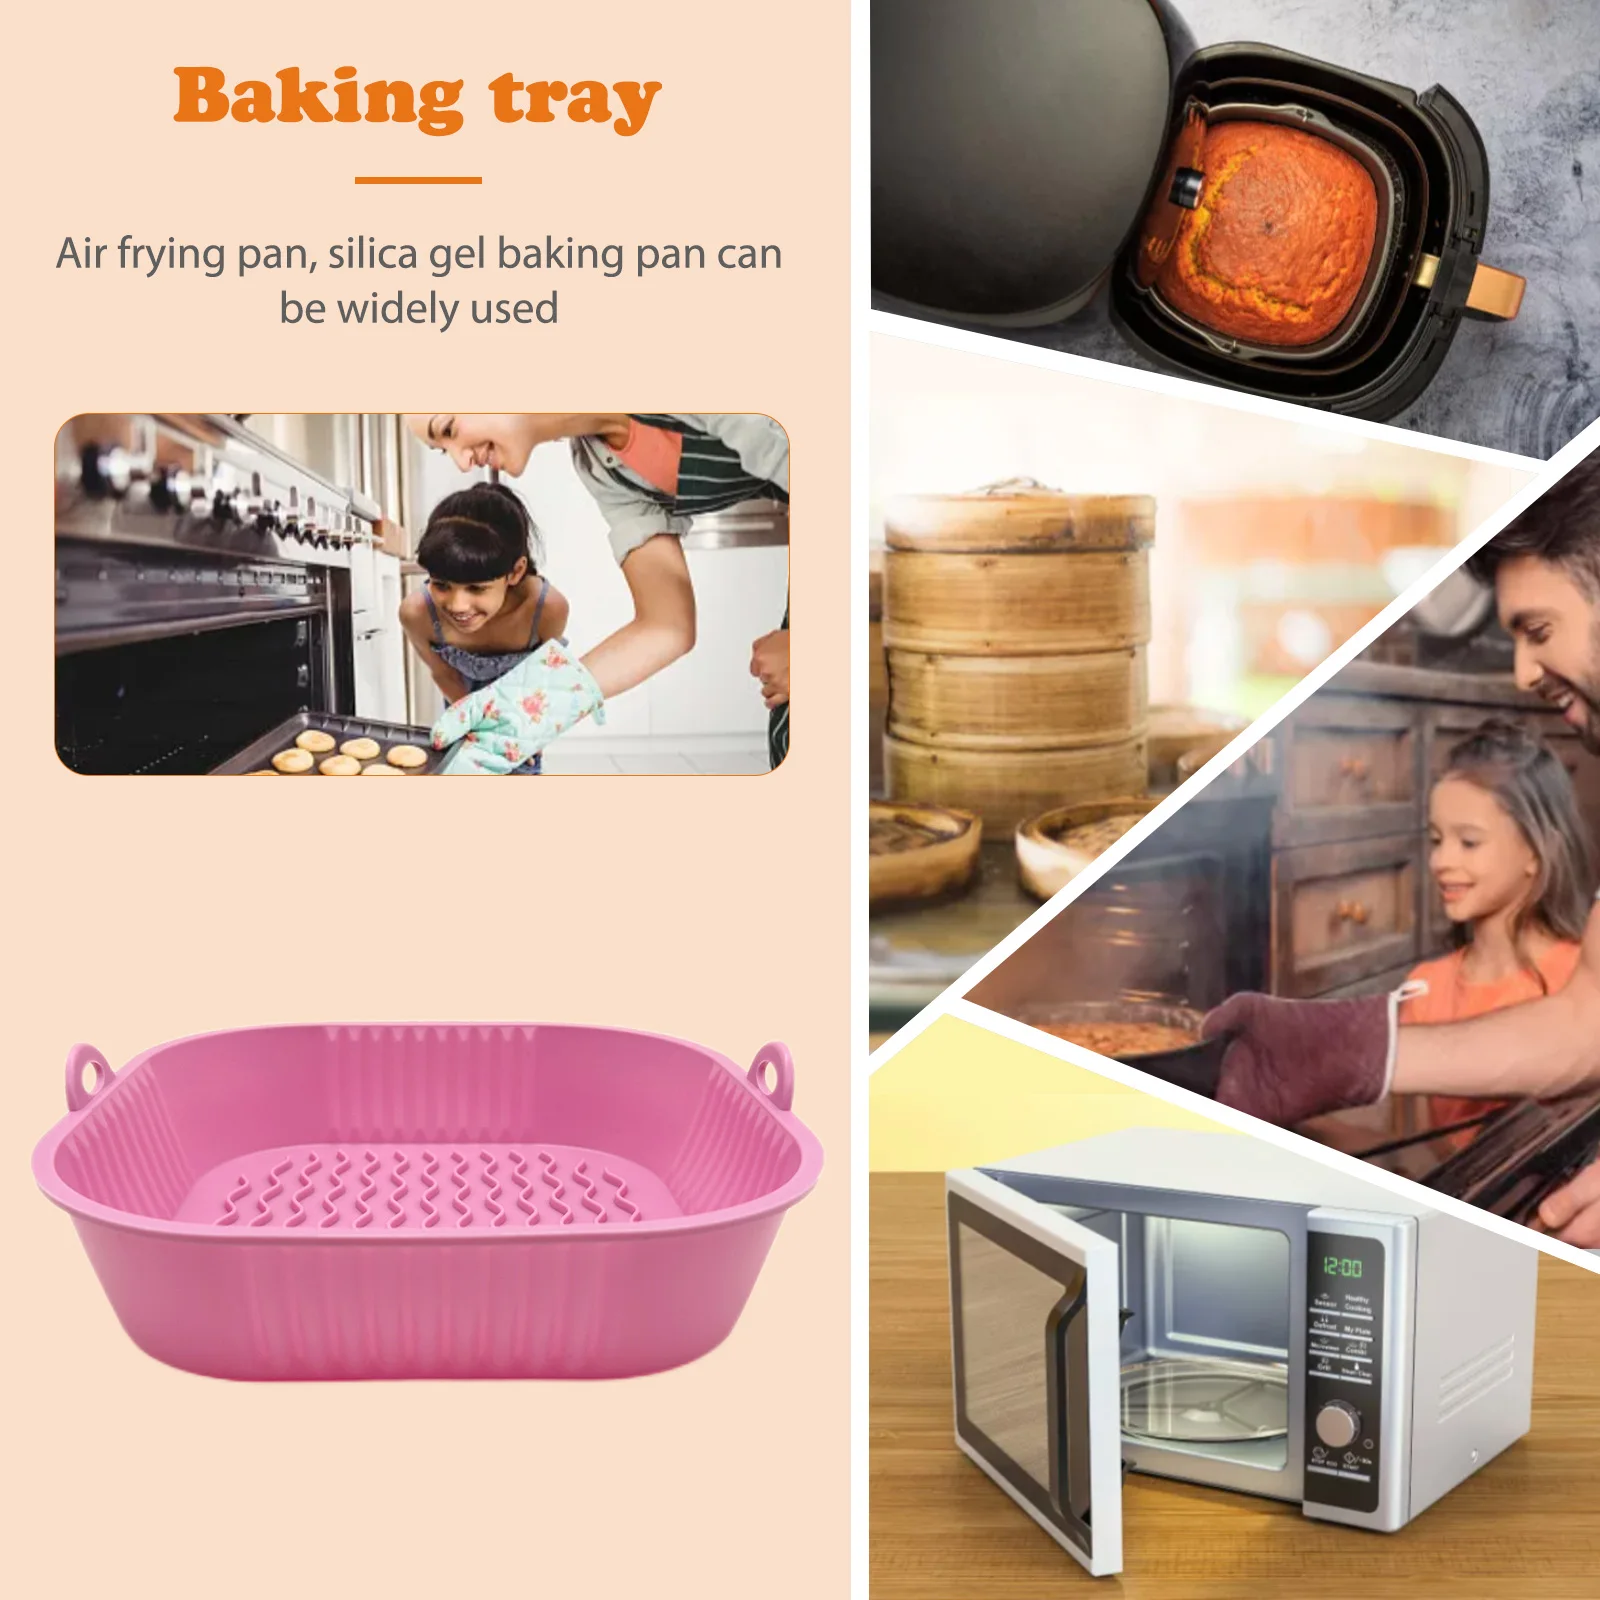 https://ae01.alicdn.com/kf/Sbf63c315d6274bb980a9750e40998c20G/Silicone-Air-Fryers-Oven-Baking-Tray-Foldable-Replacement-19cm-Square-Shaped-Pizza-Basket-Mat-with-Handle.jpg